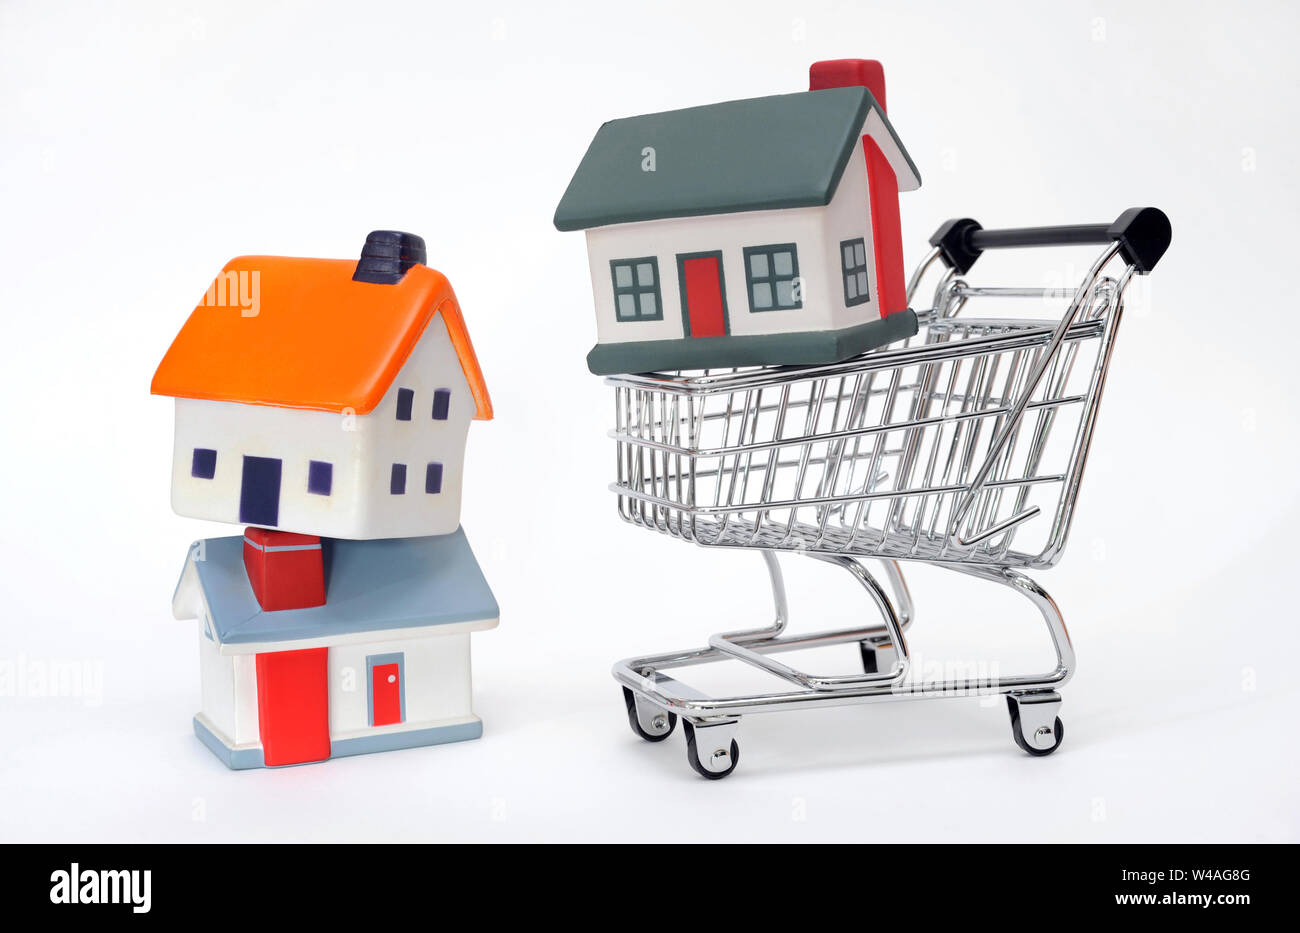 MODEL HOUSES WITH SUPERMARKET SHOPPING TROLLEY RE MORTGAGES HOUSE BUYING FIRST TIME BUYERS SHOPPERS FINANCE ETC UK Stock Photo